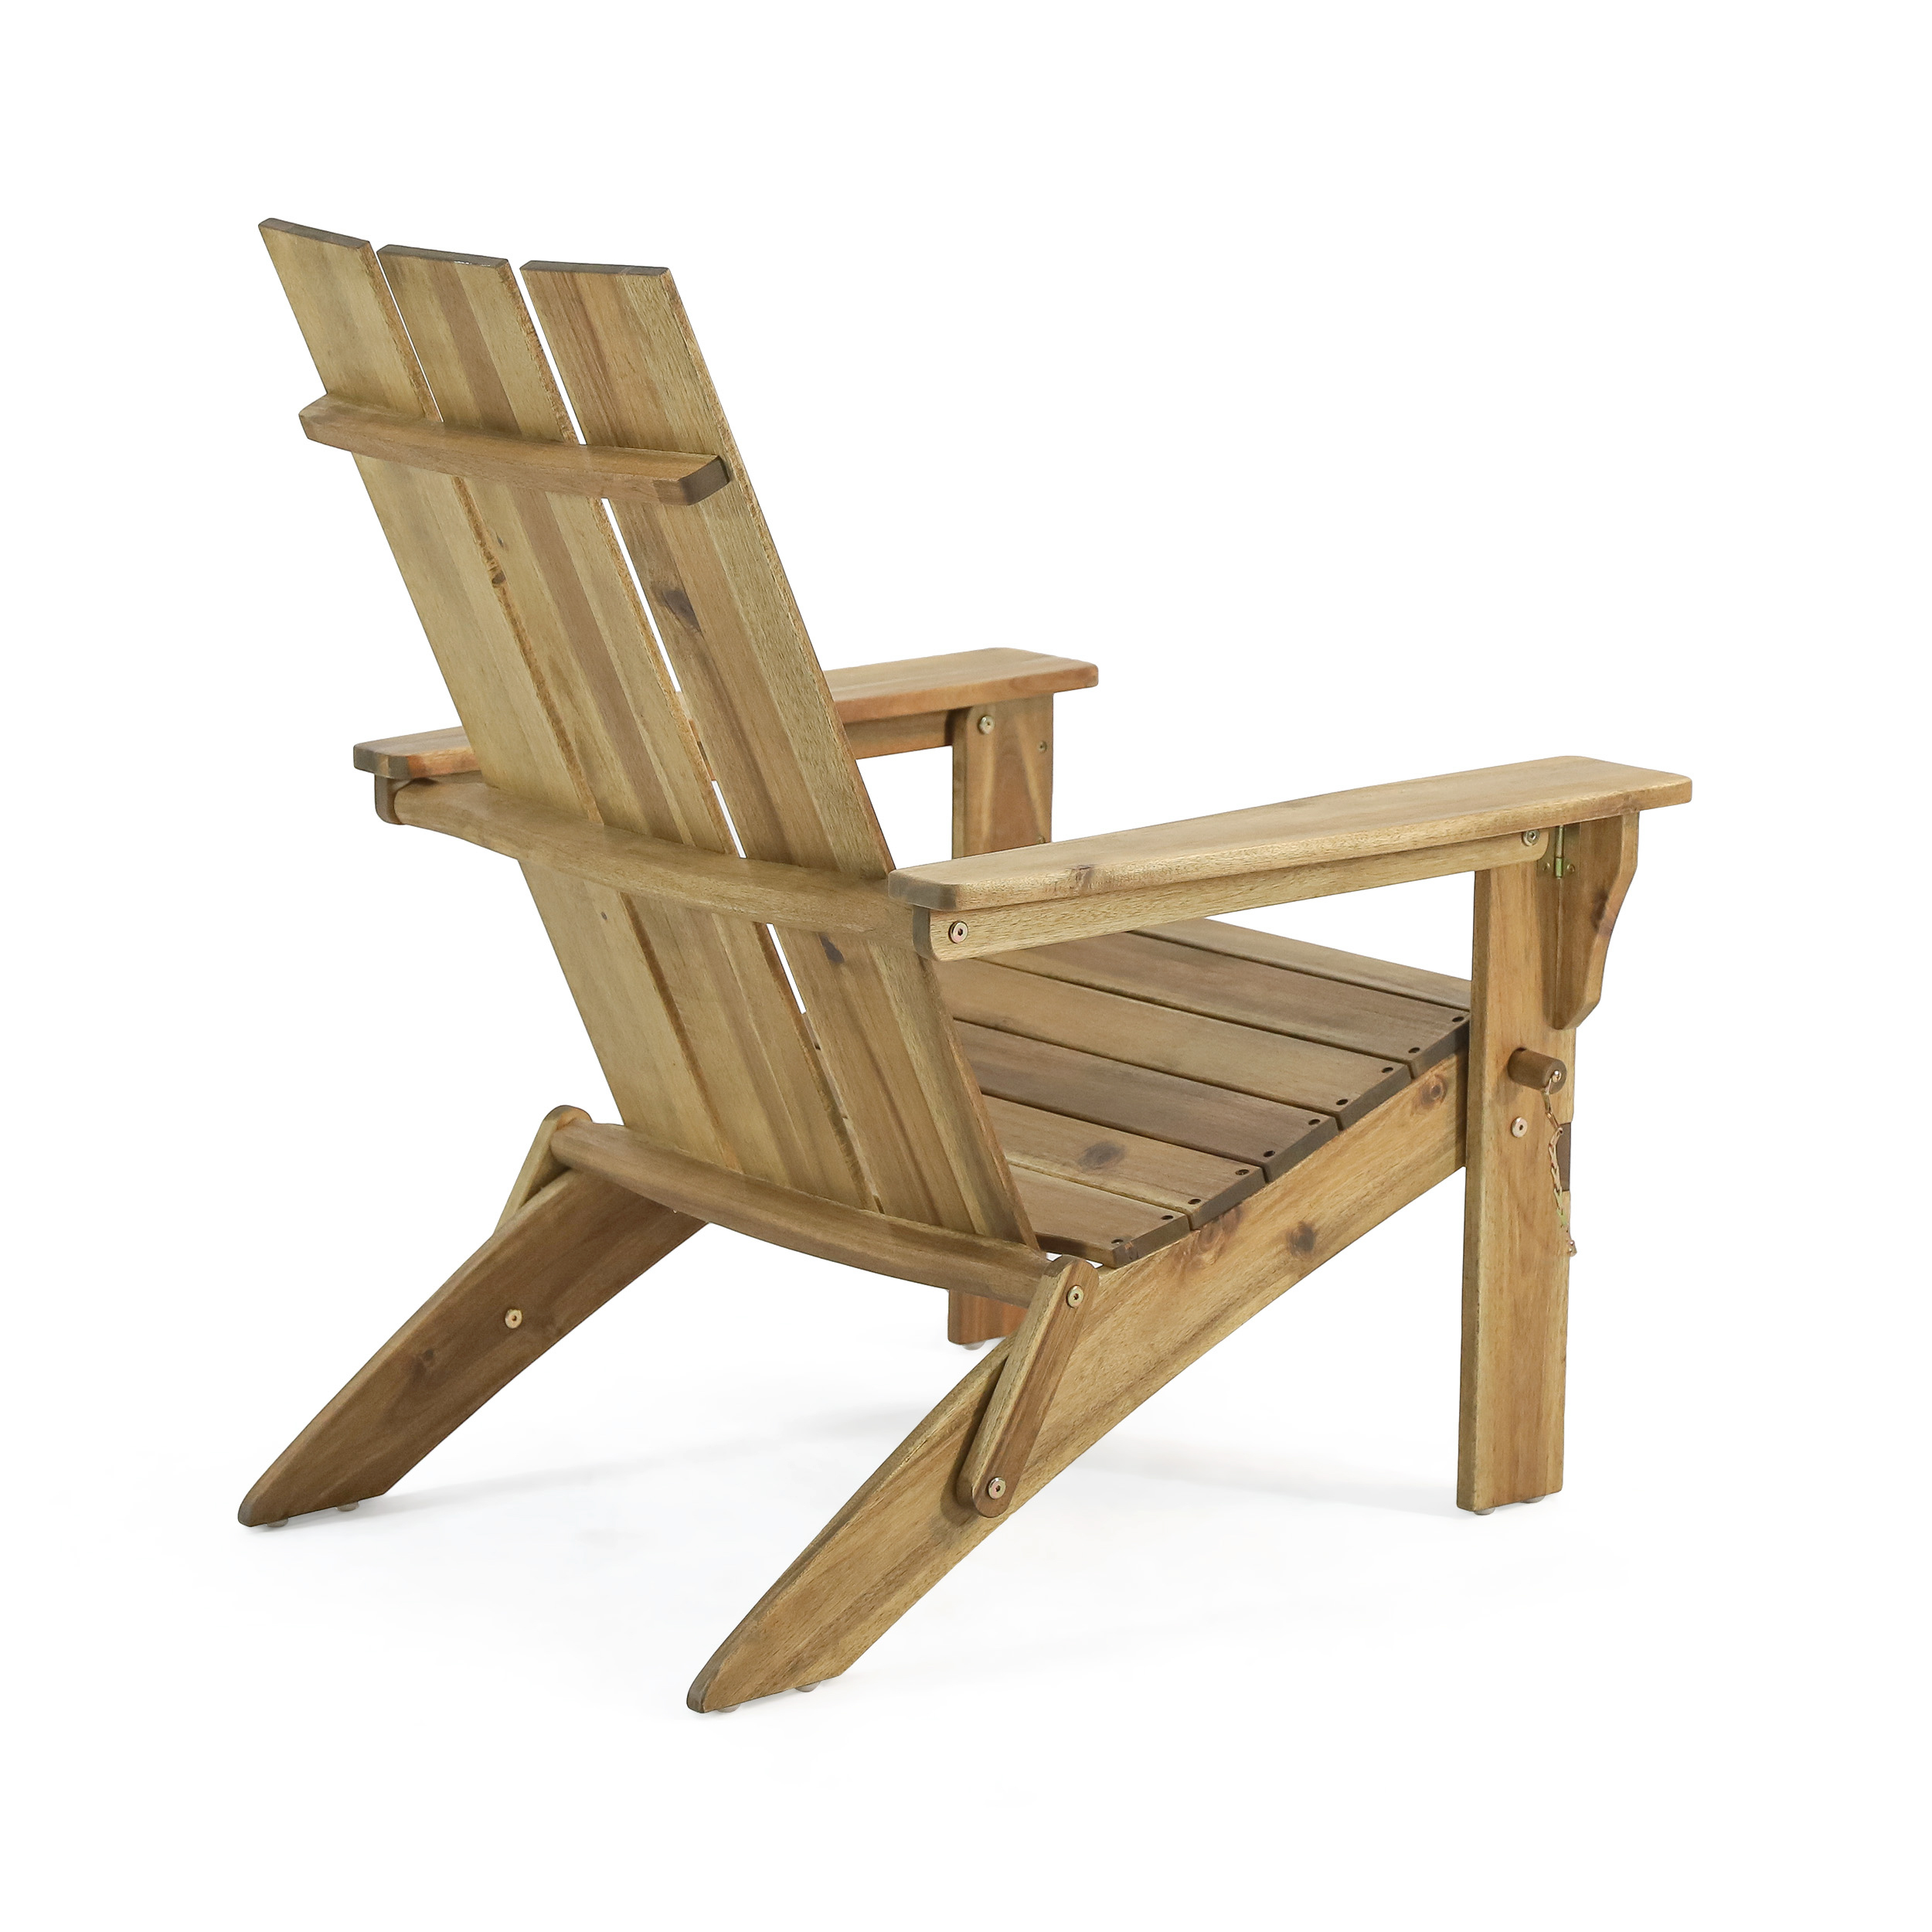 KUIKUI Outdoor Classic Natural Color Solid Wood Adirondack Chair Garden Lounge Chair - image 3 of 5